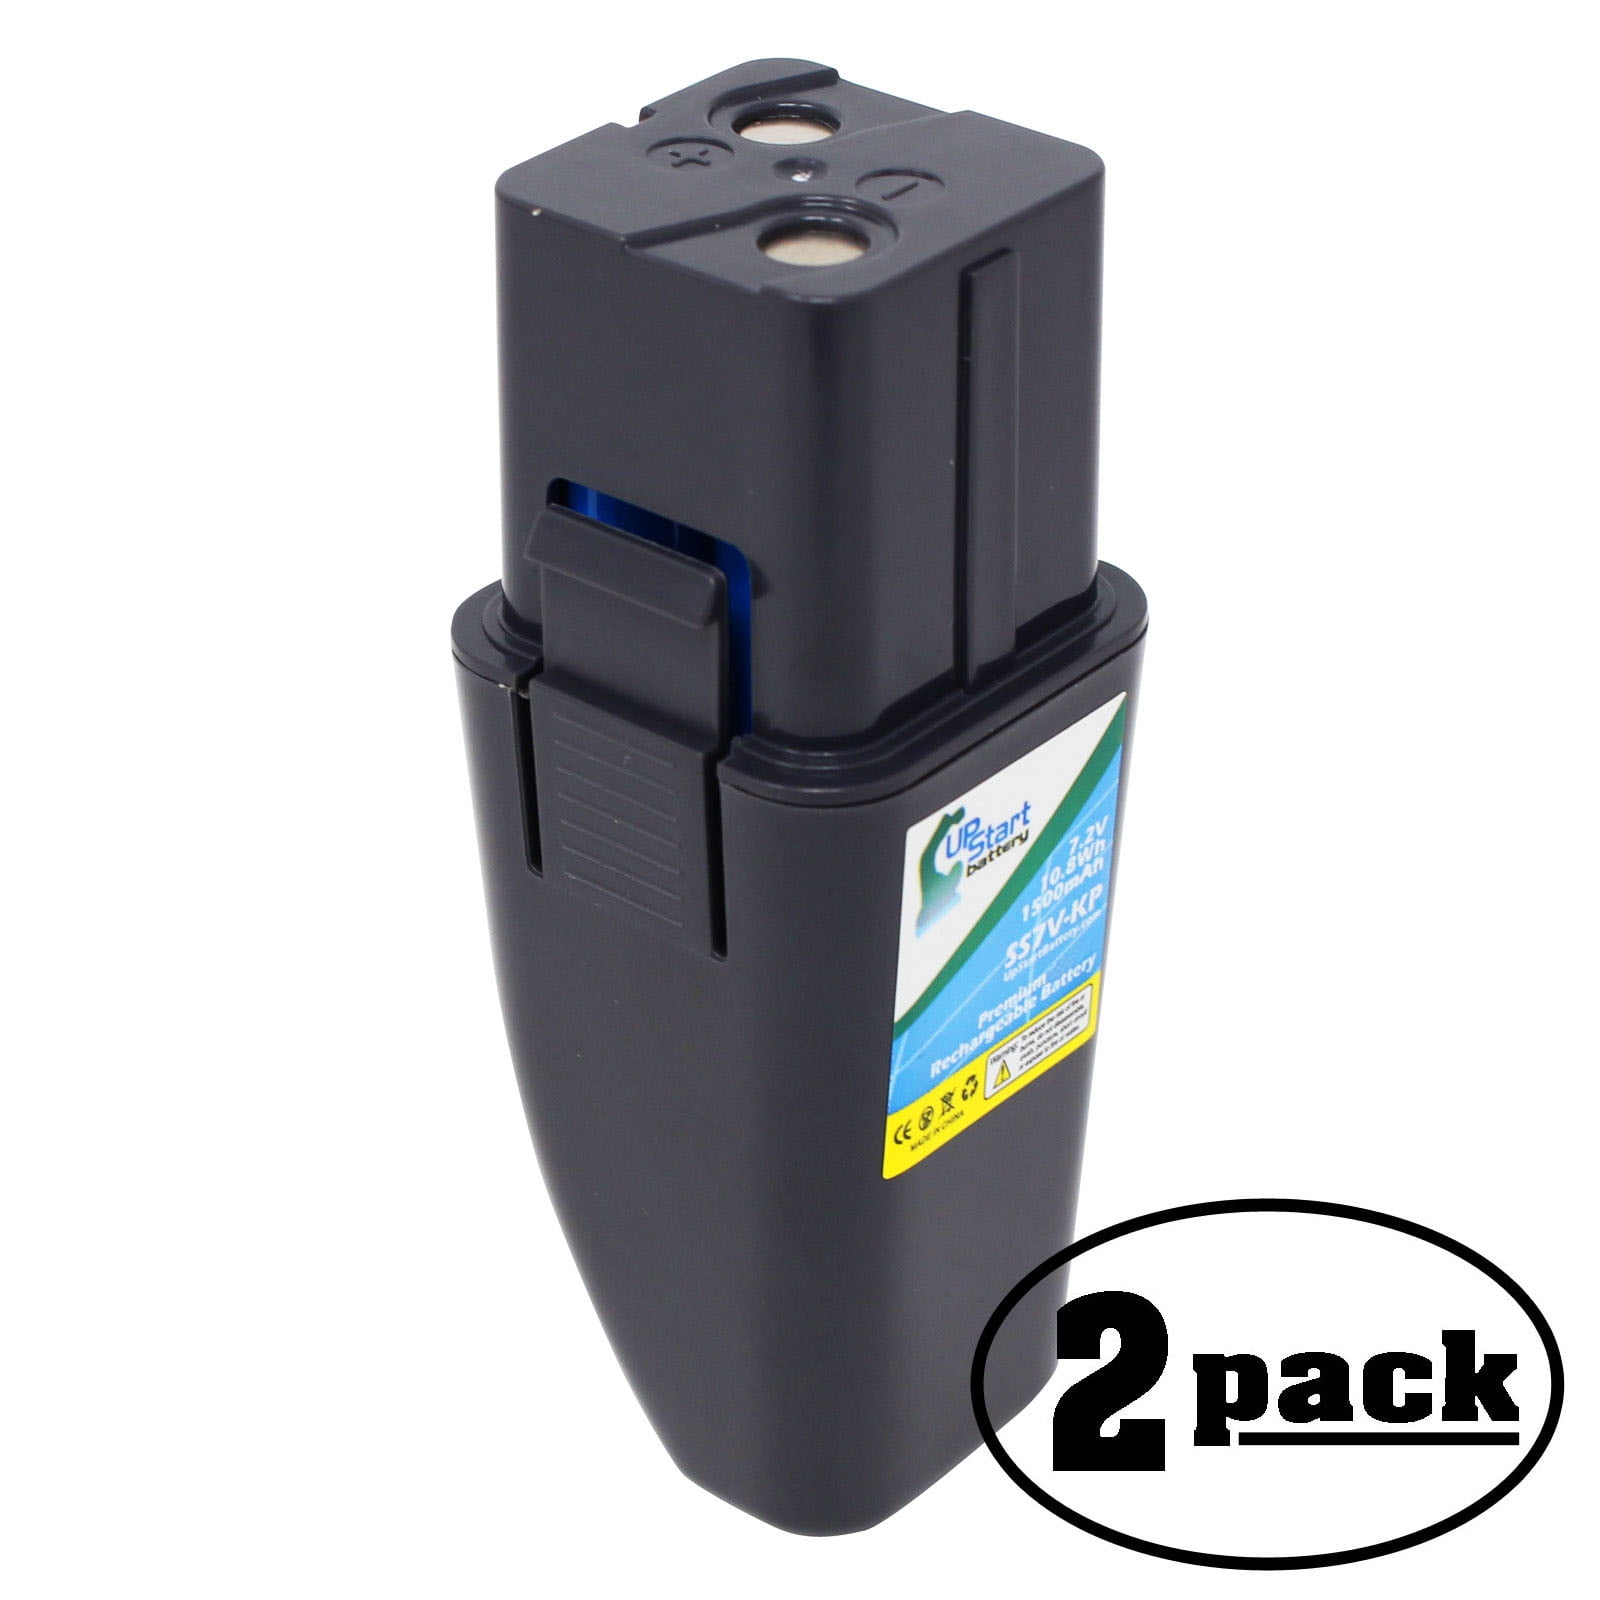 Replacement Battery for Ontel Swivel Sweeper Vacuum Black Swsb-mo Models G1 & G2 for sale online 